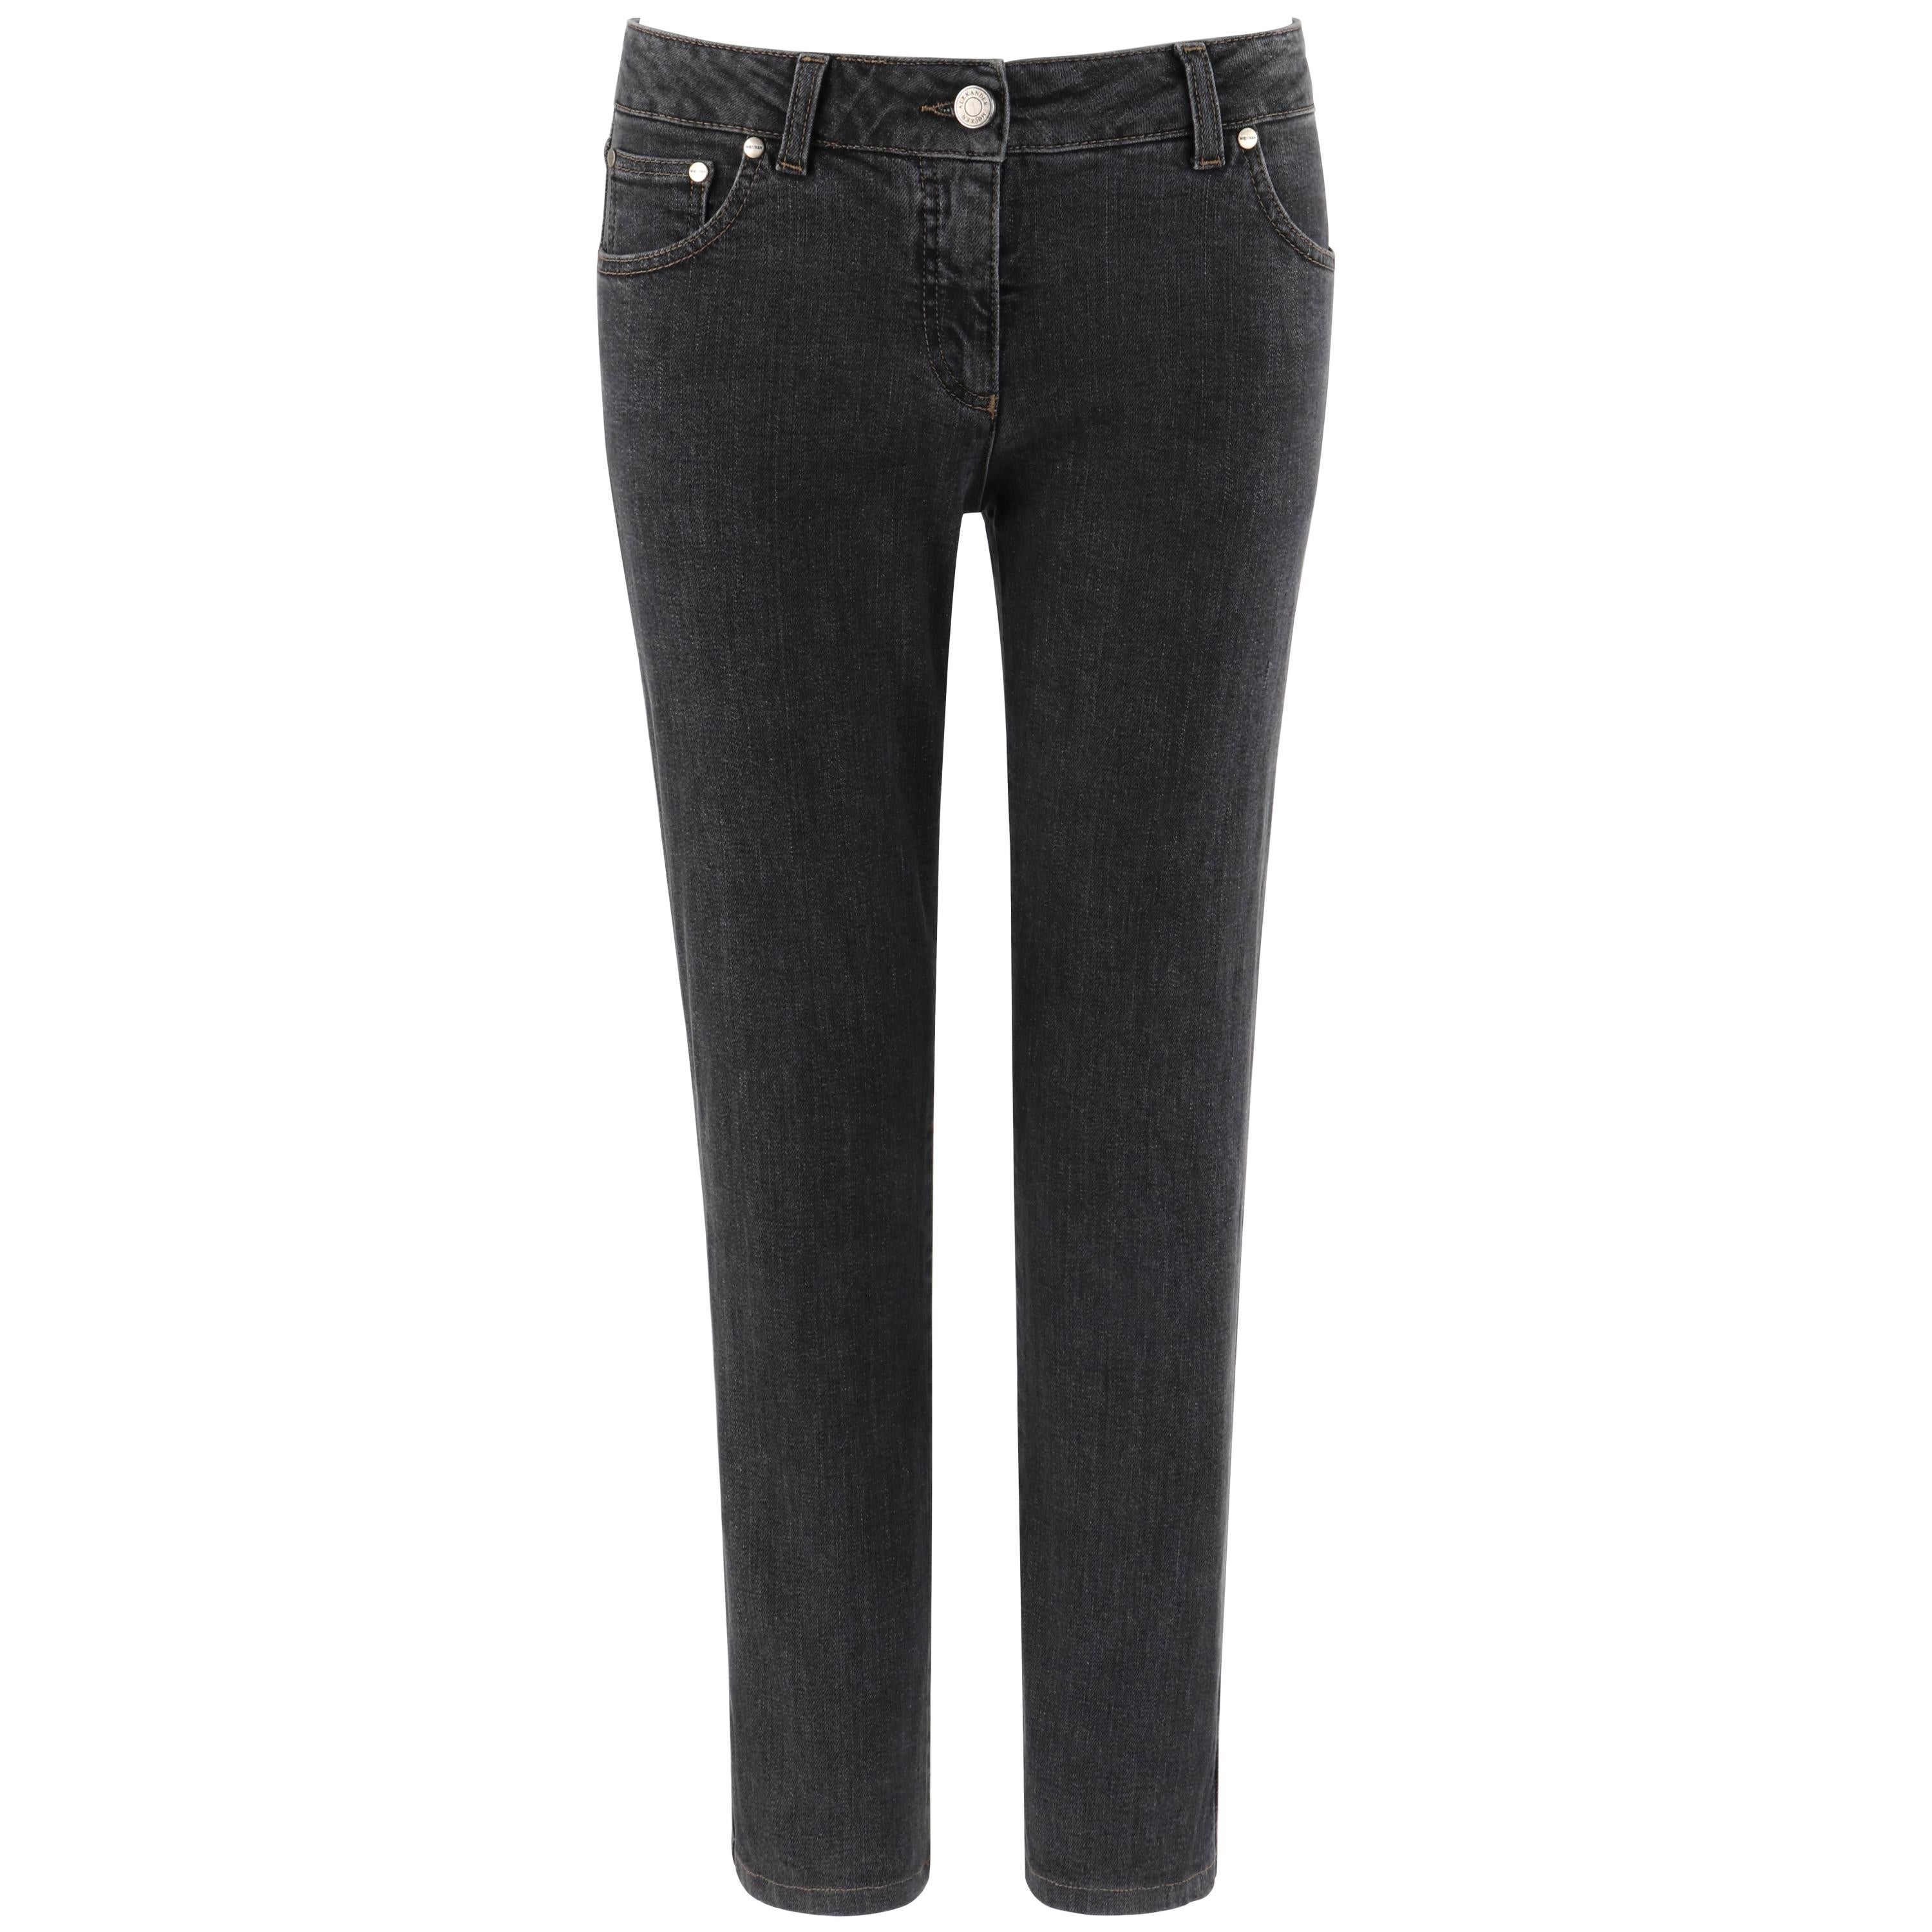 ALEXANDER McQUEEN S/S 2007 “Saraband” Grey Low Rise Skinny Jeans Pants